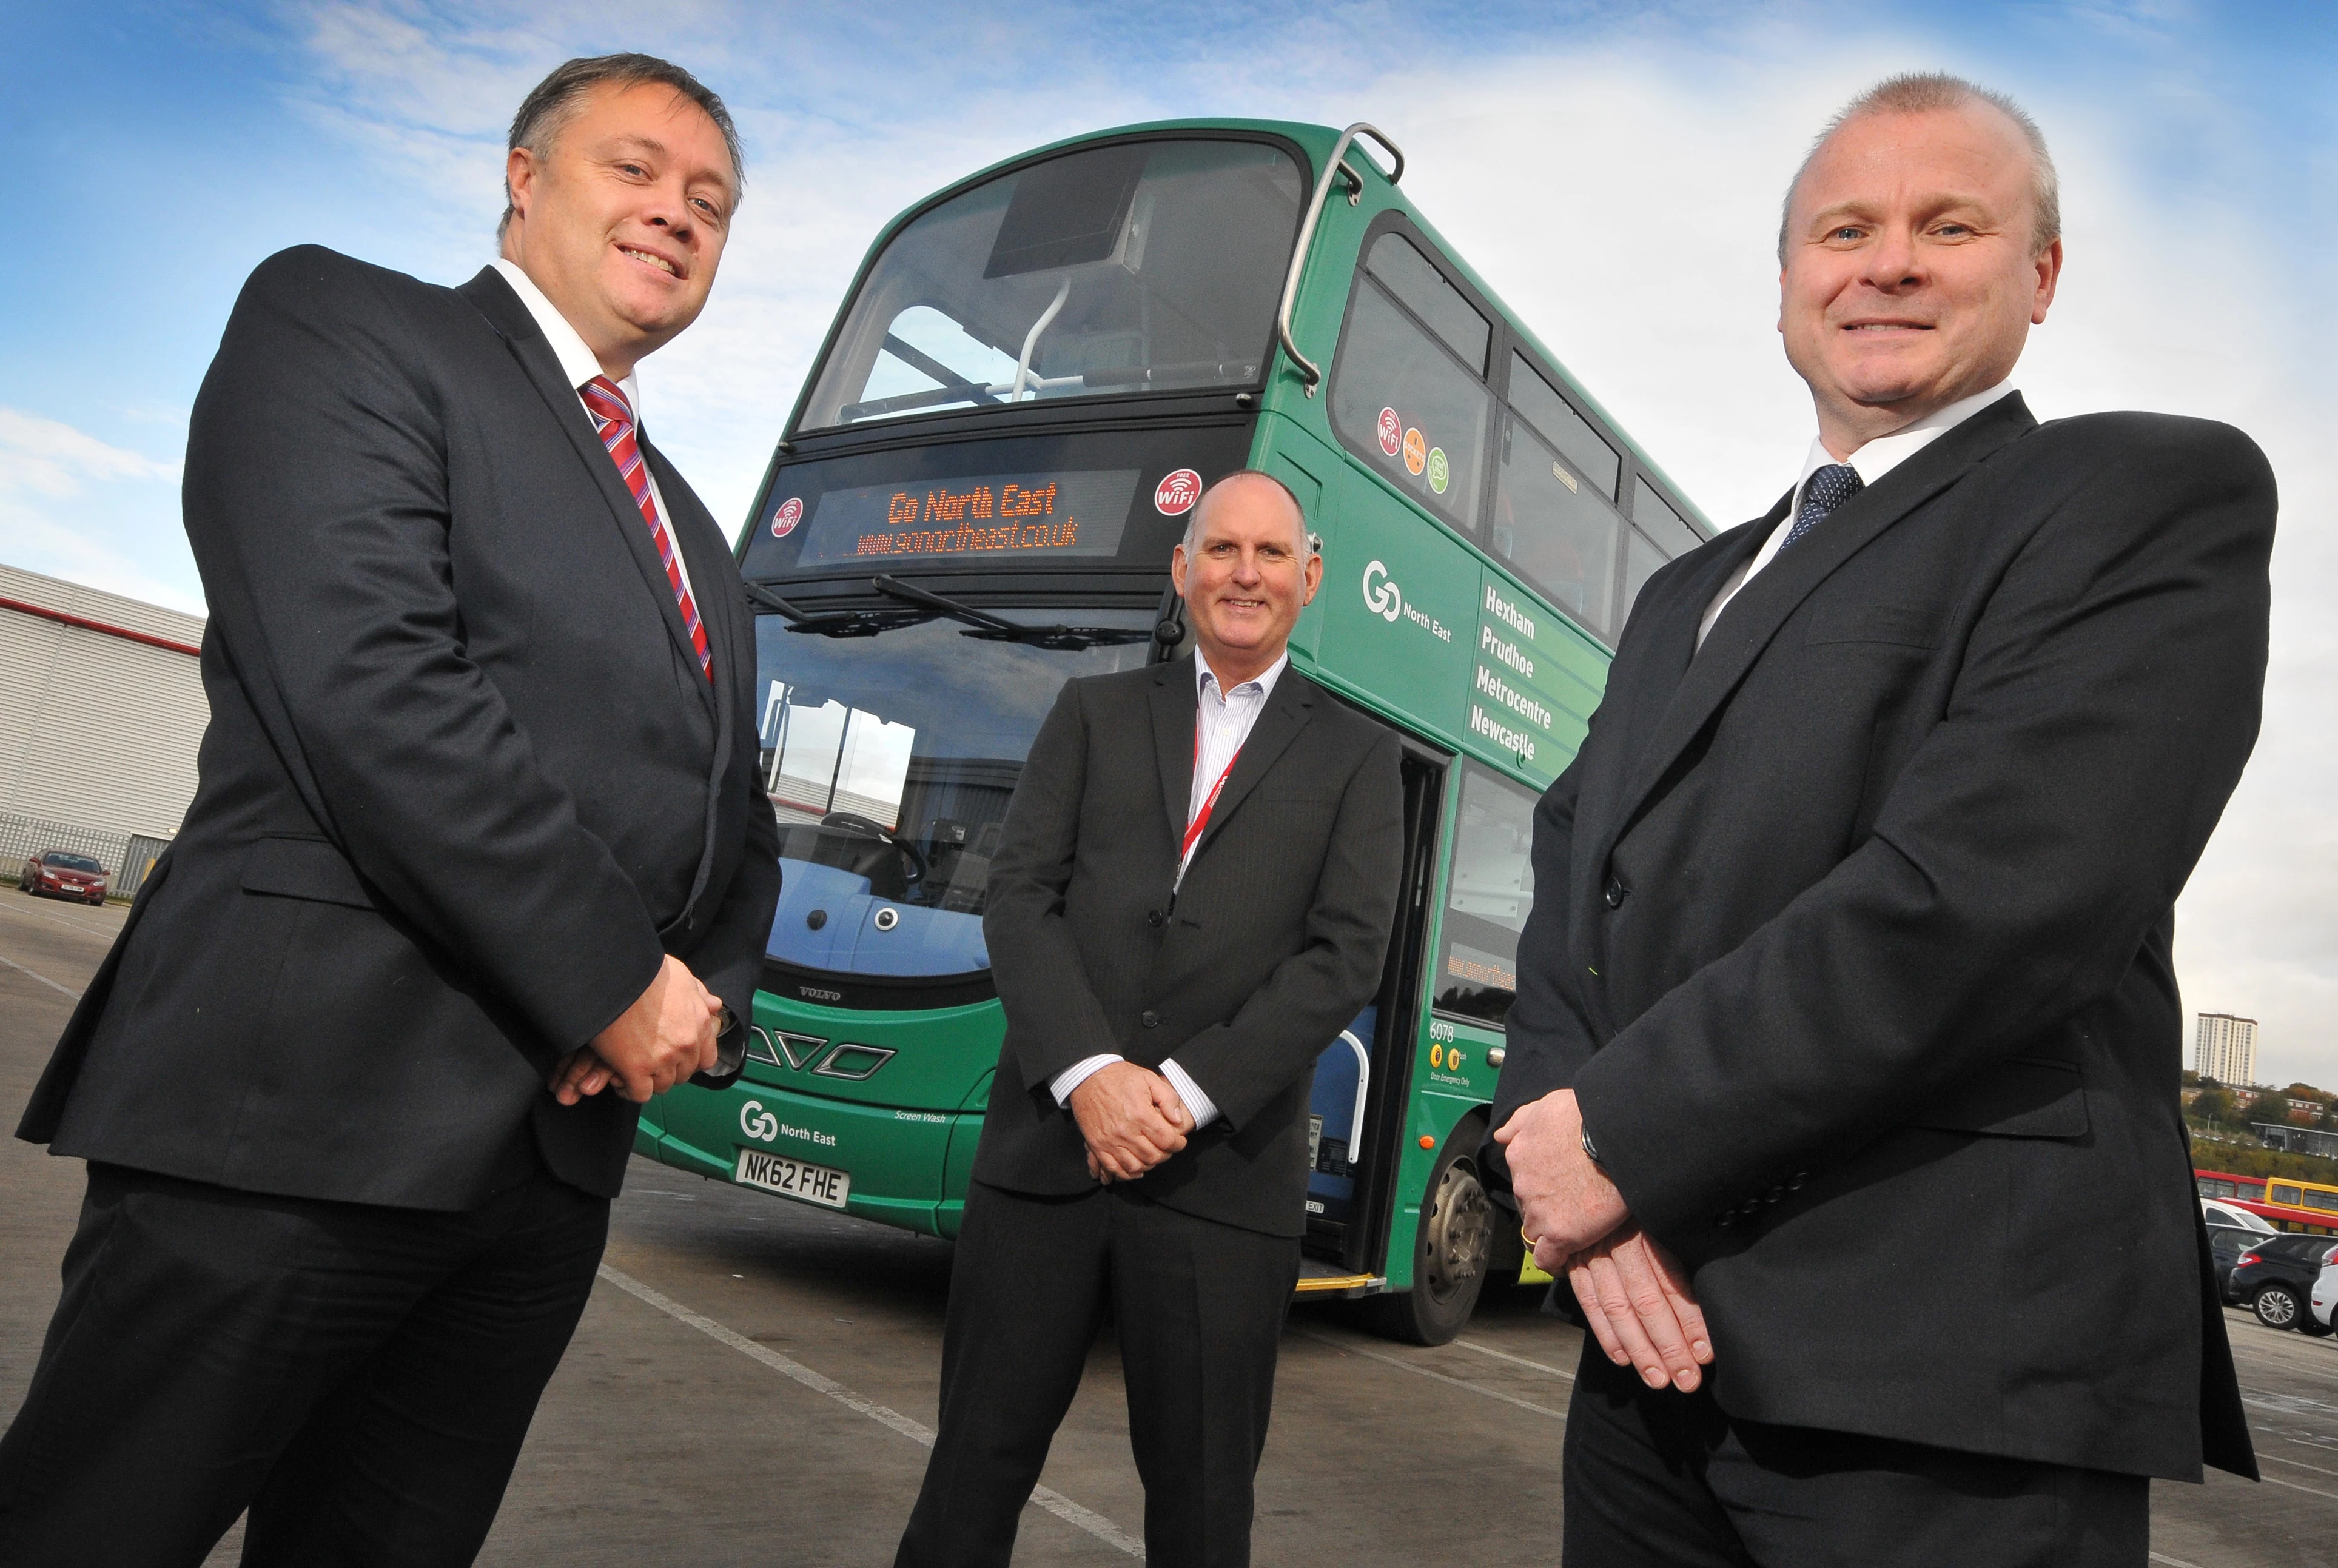 L-R Steve McColl from JobCentrePlus, Keith Robertson from Go North East and Ivan Jepson from Gateshead College